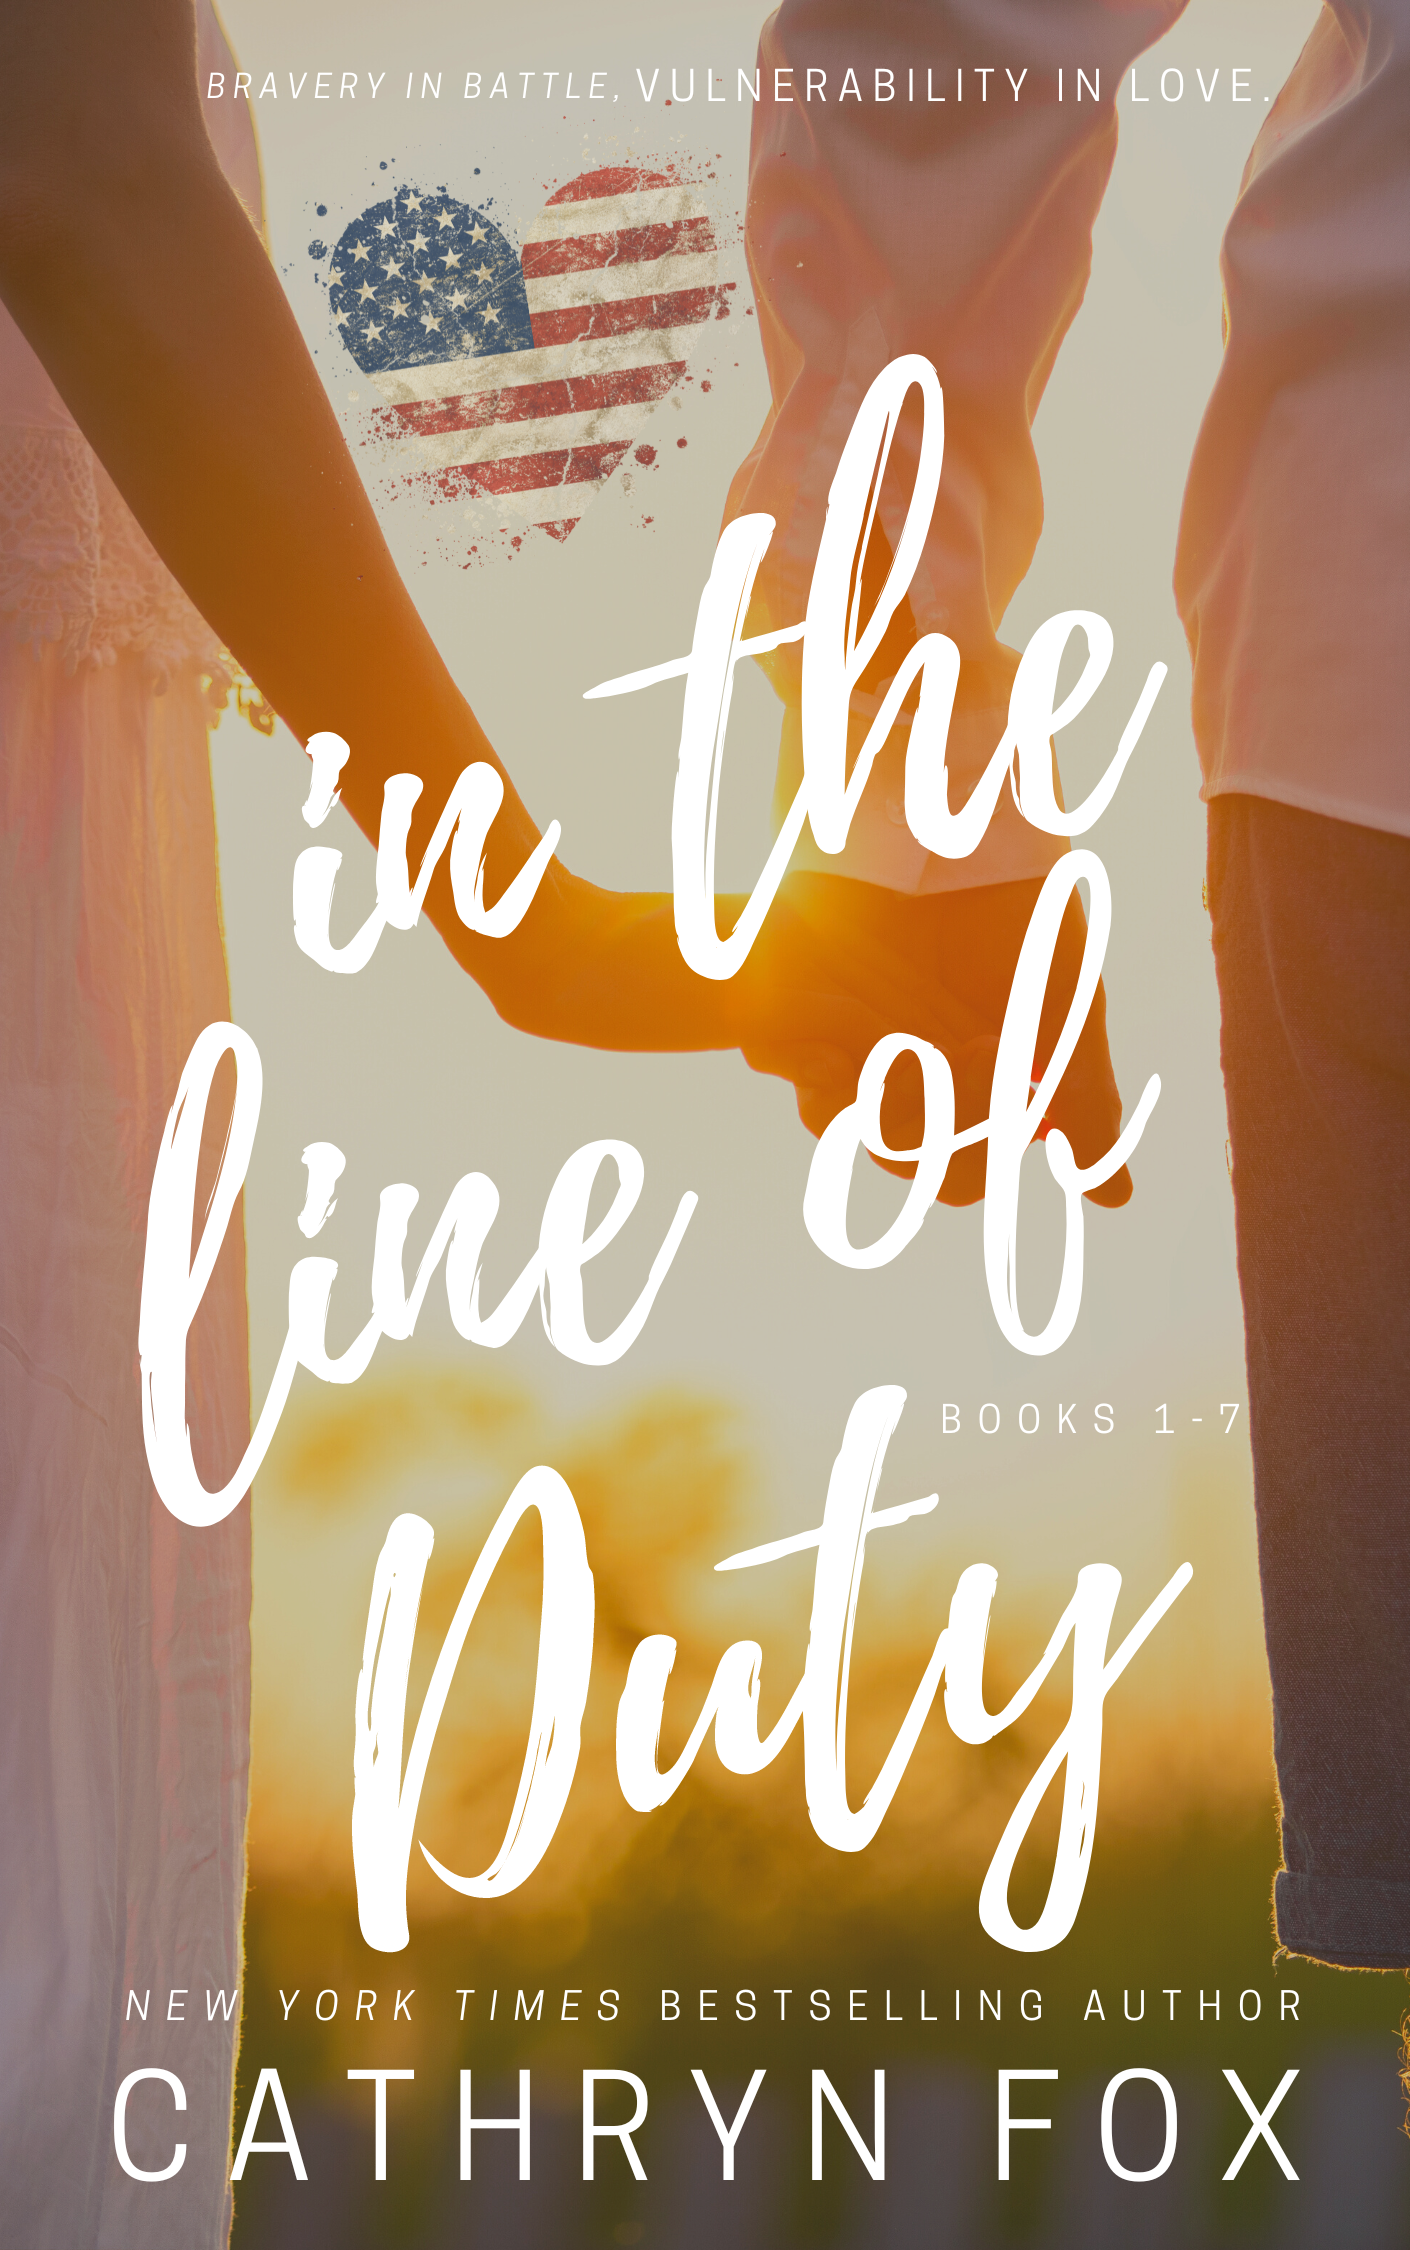 In The Line of Duty · Books 1-7 (eBook Bundle)